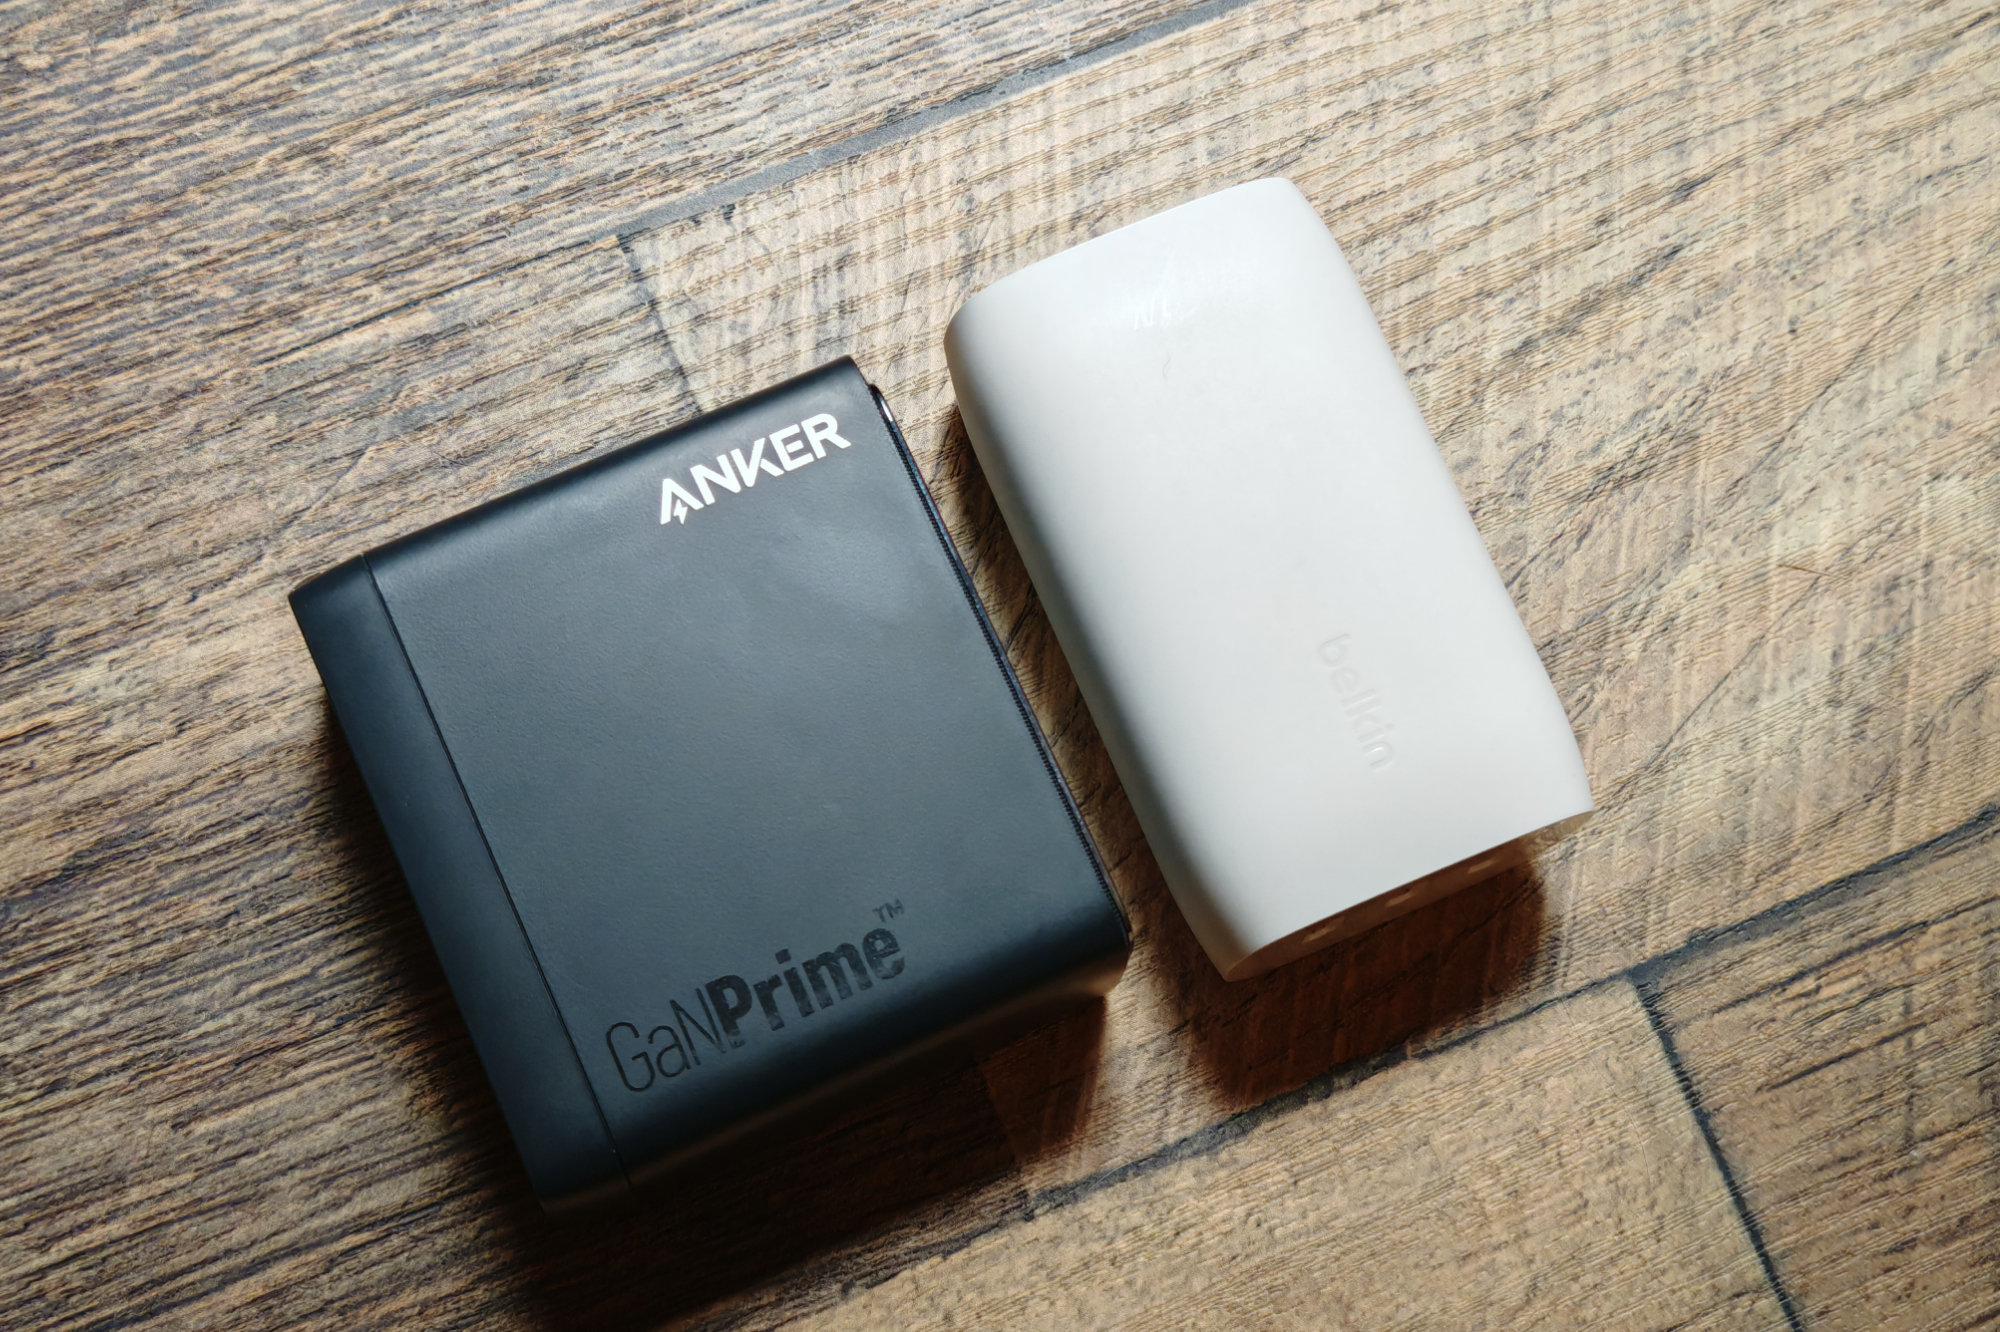 An Anker charger and a Belkin charger laying next to each other on a desk.